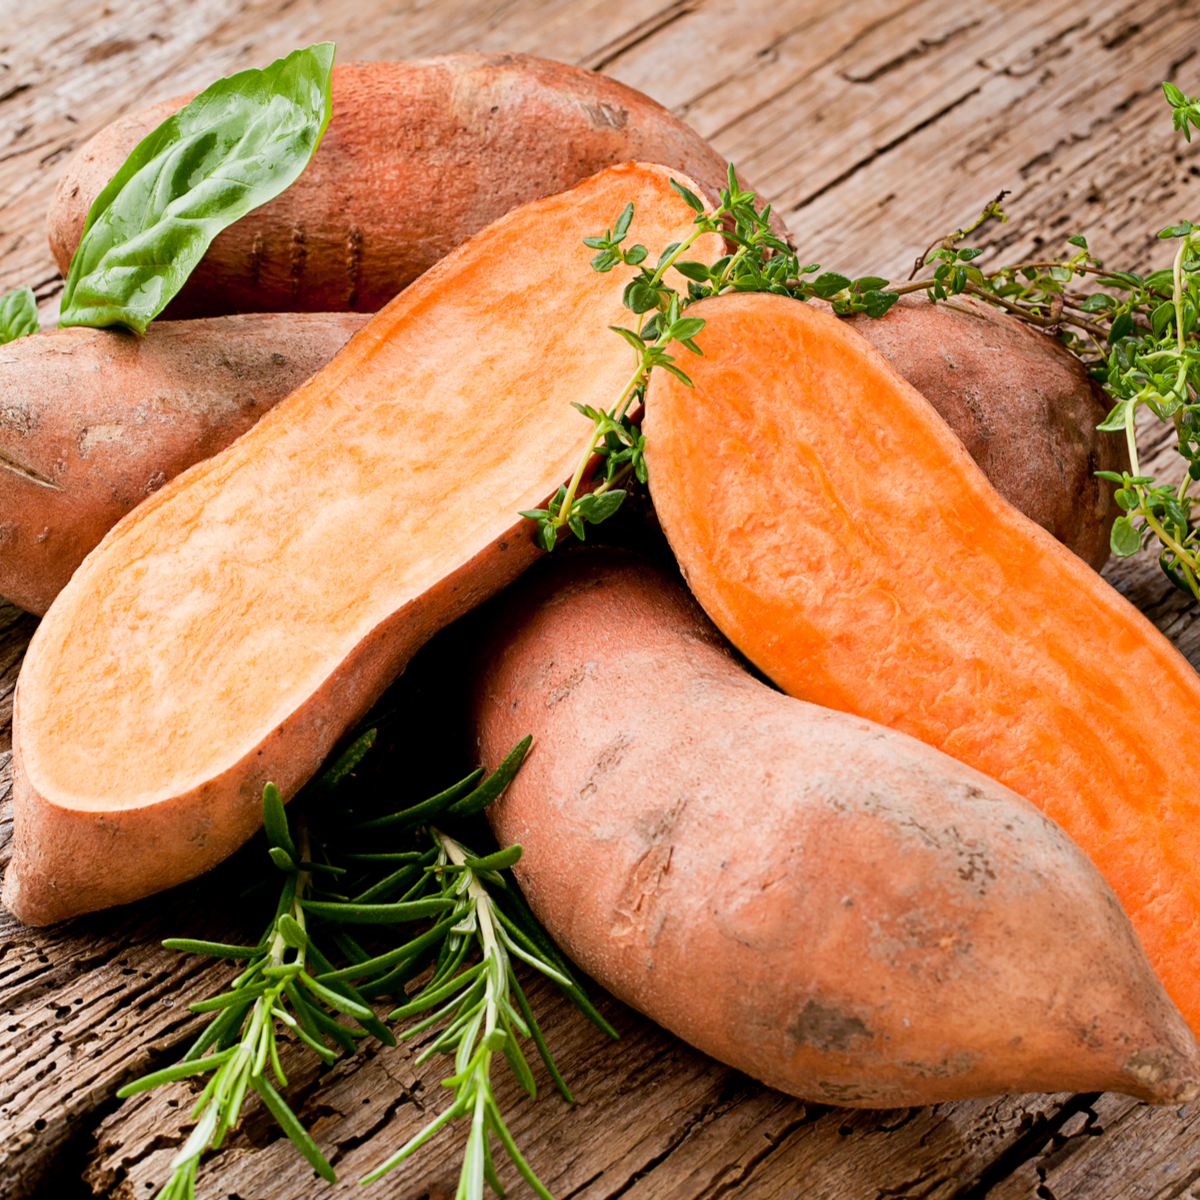 halved and whole sweet potatoes